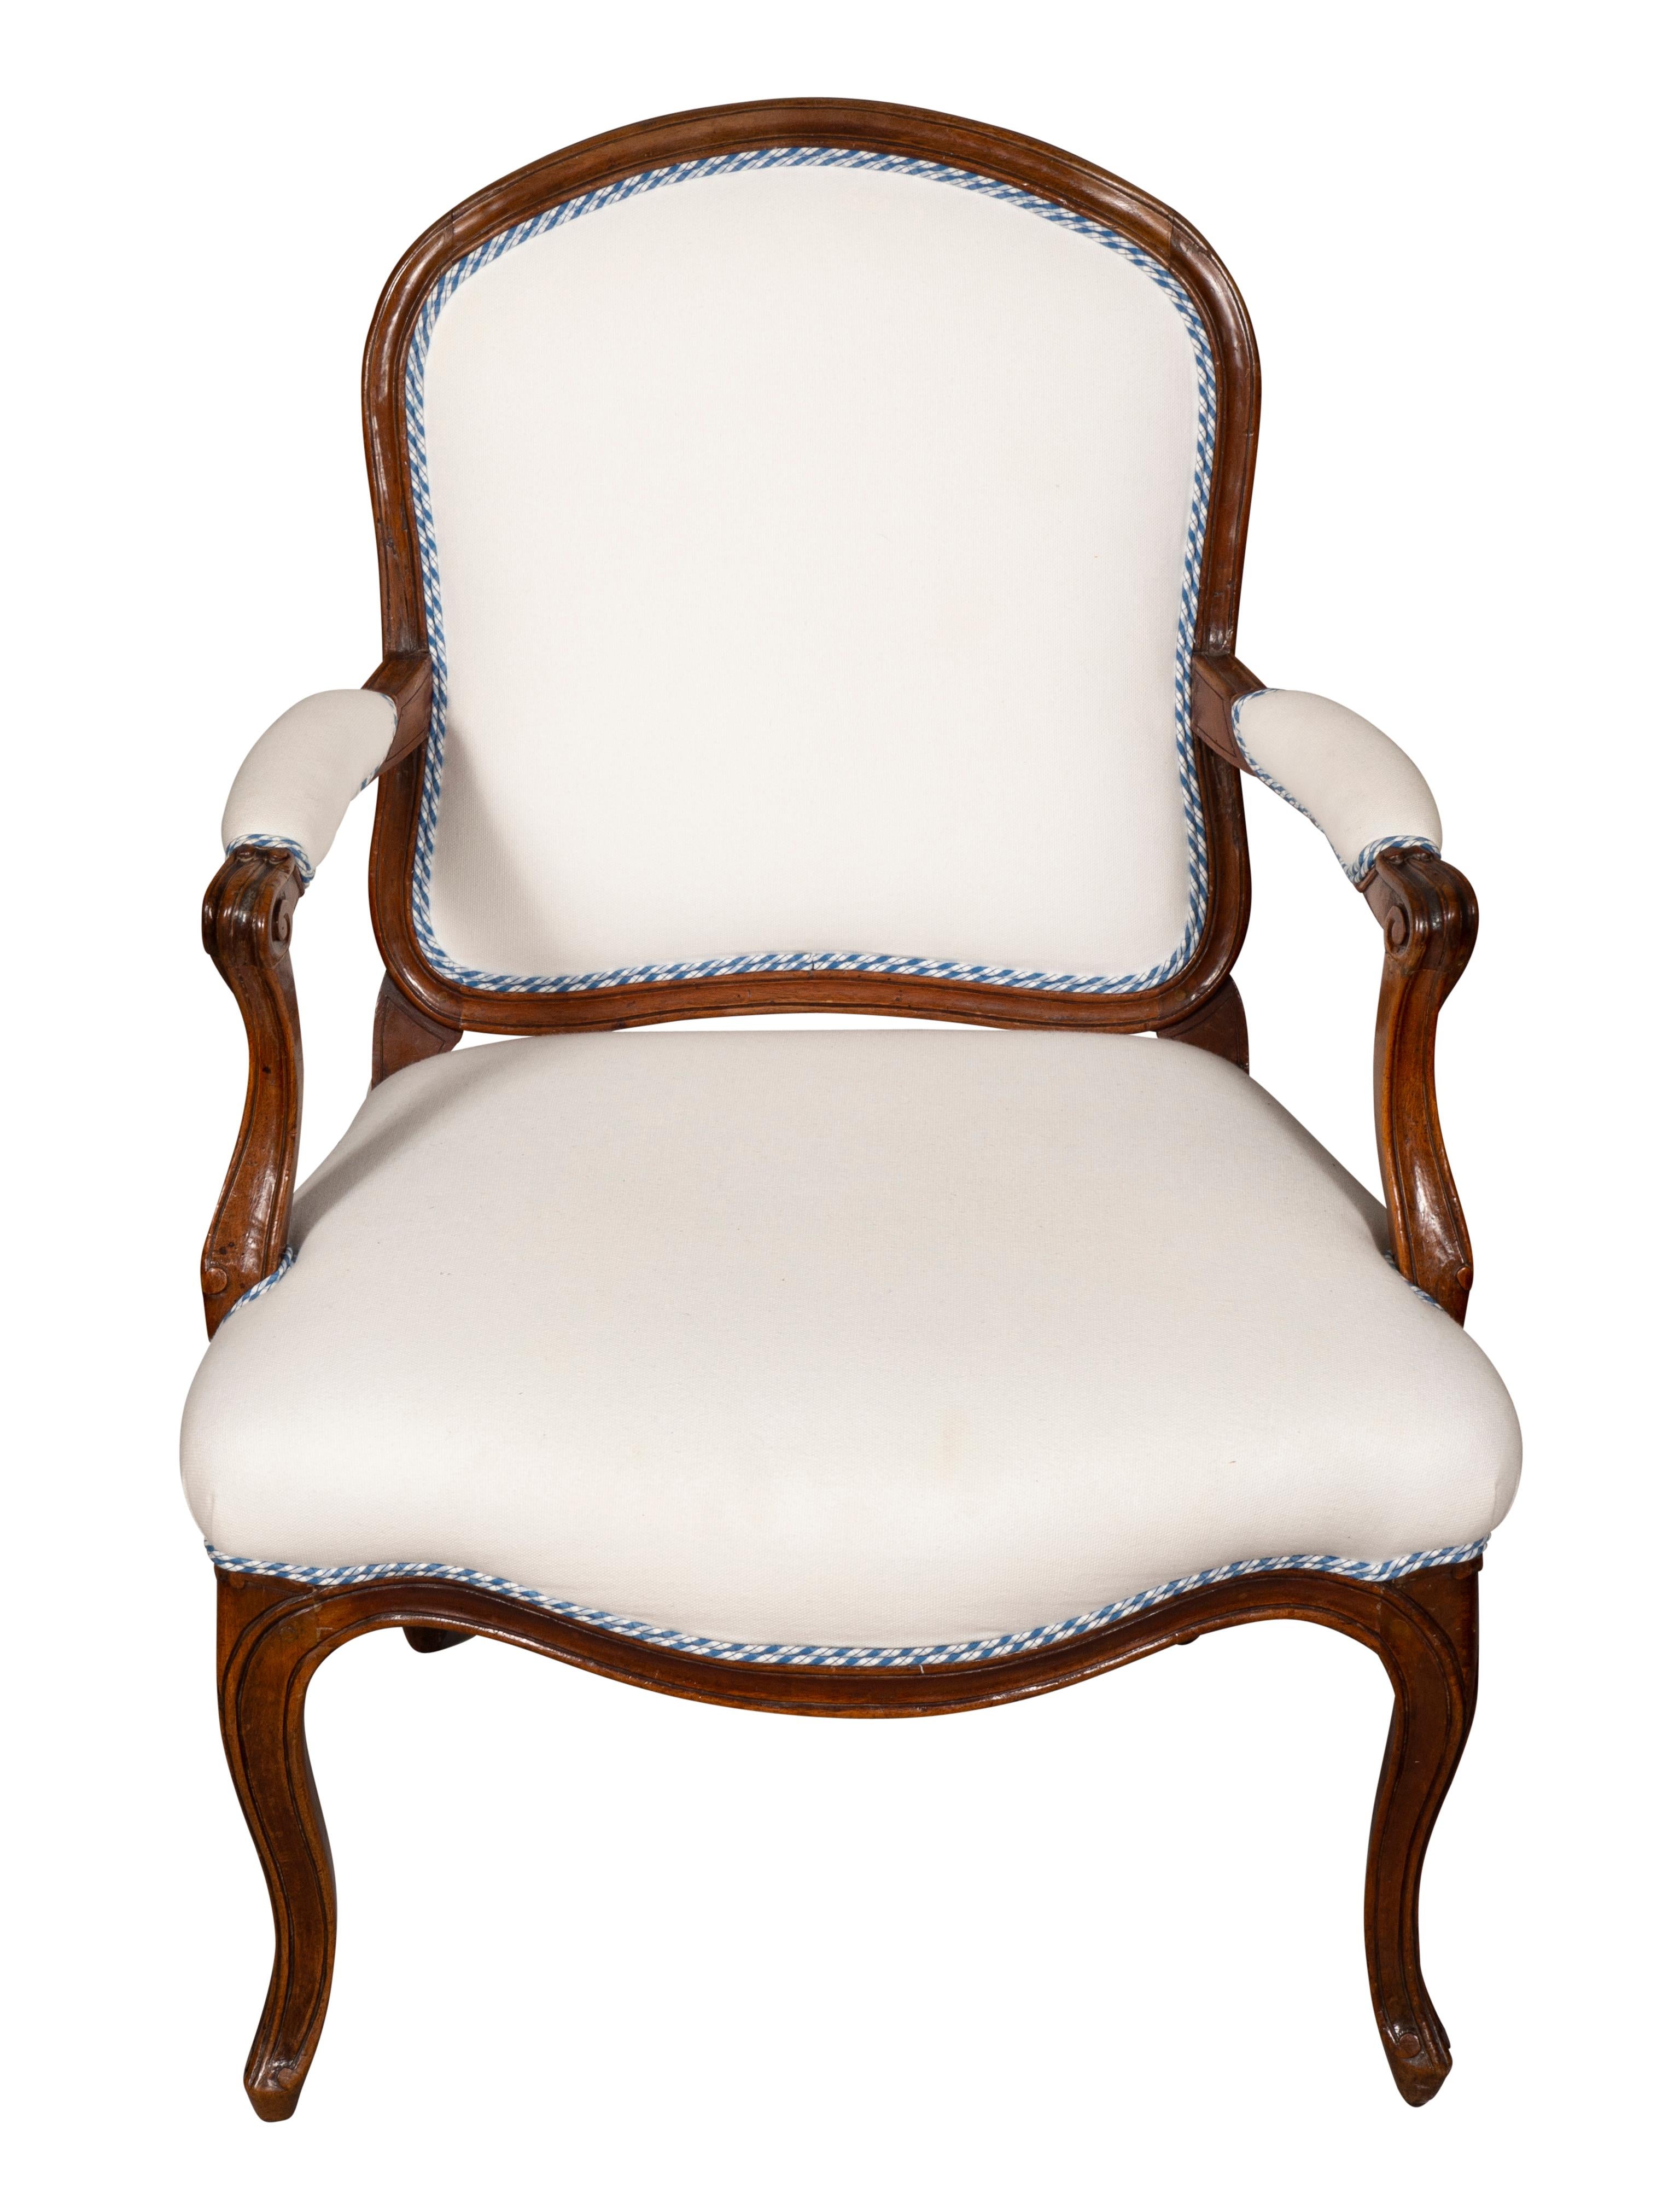 With arched back and serpentine seat, carved arms raised on cabriole legs. Nice upholstery.